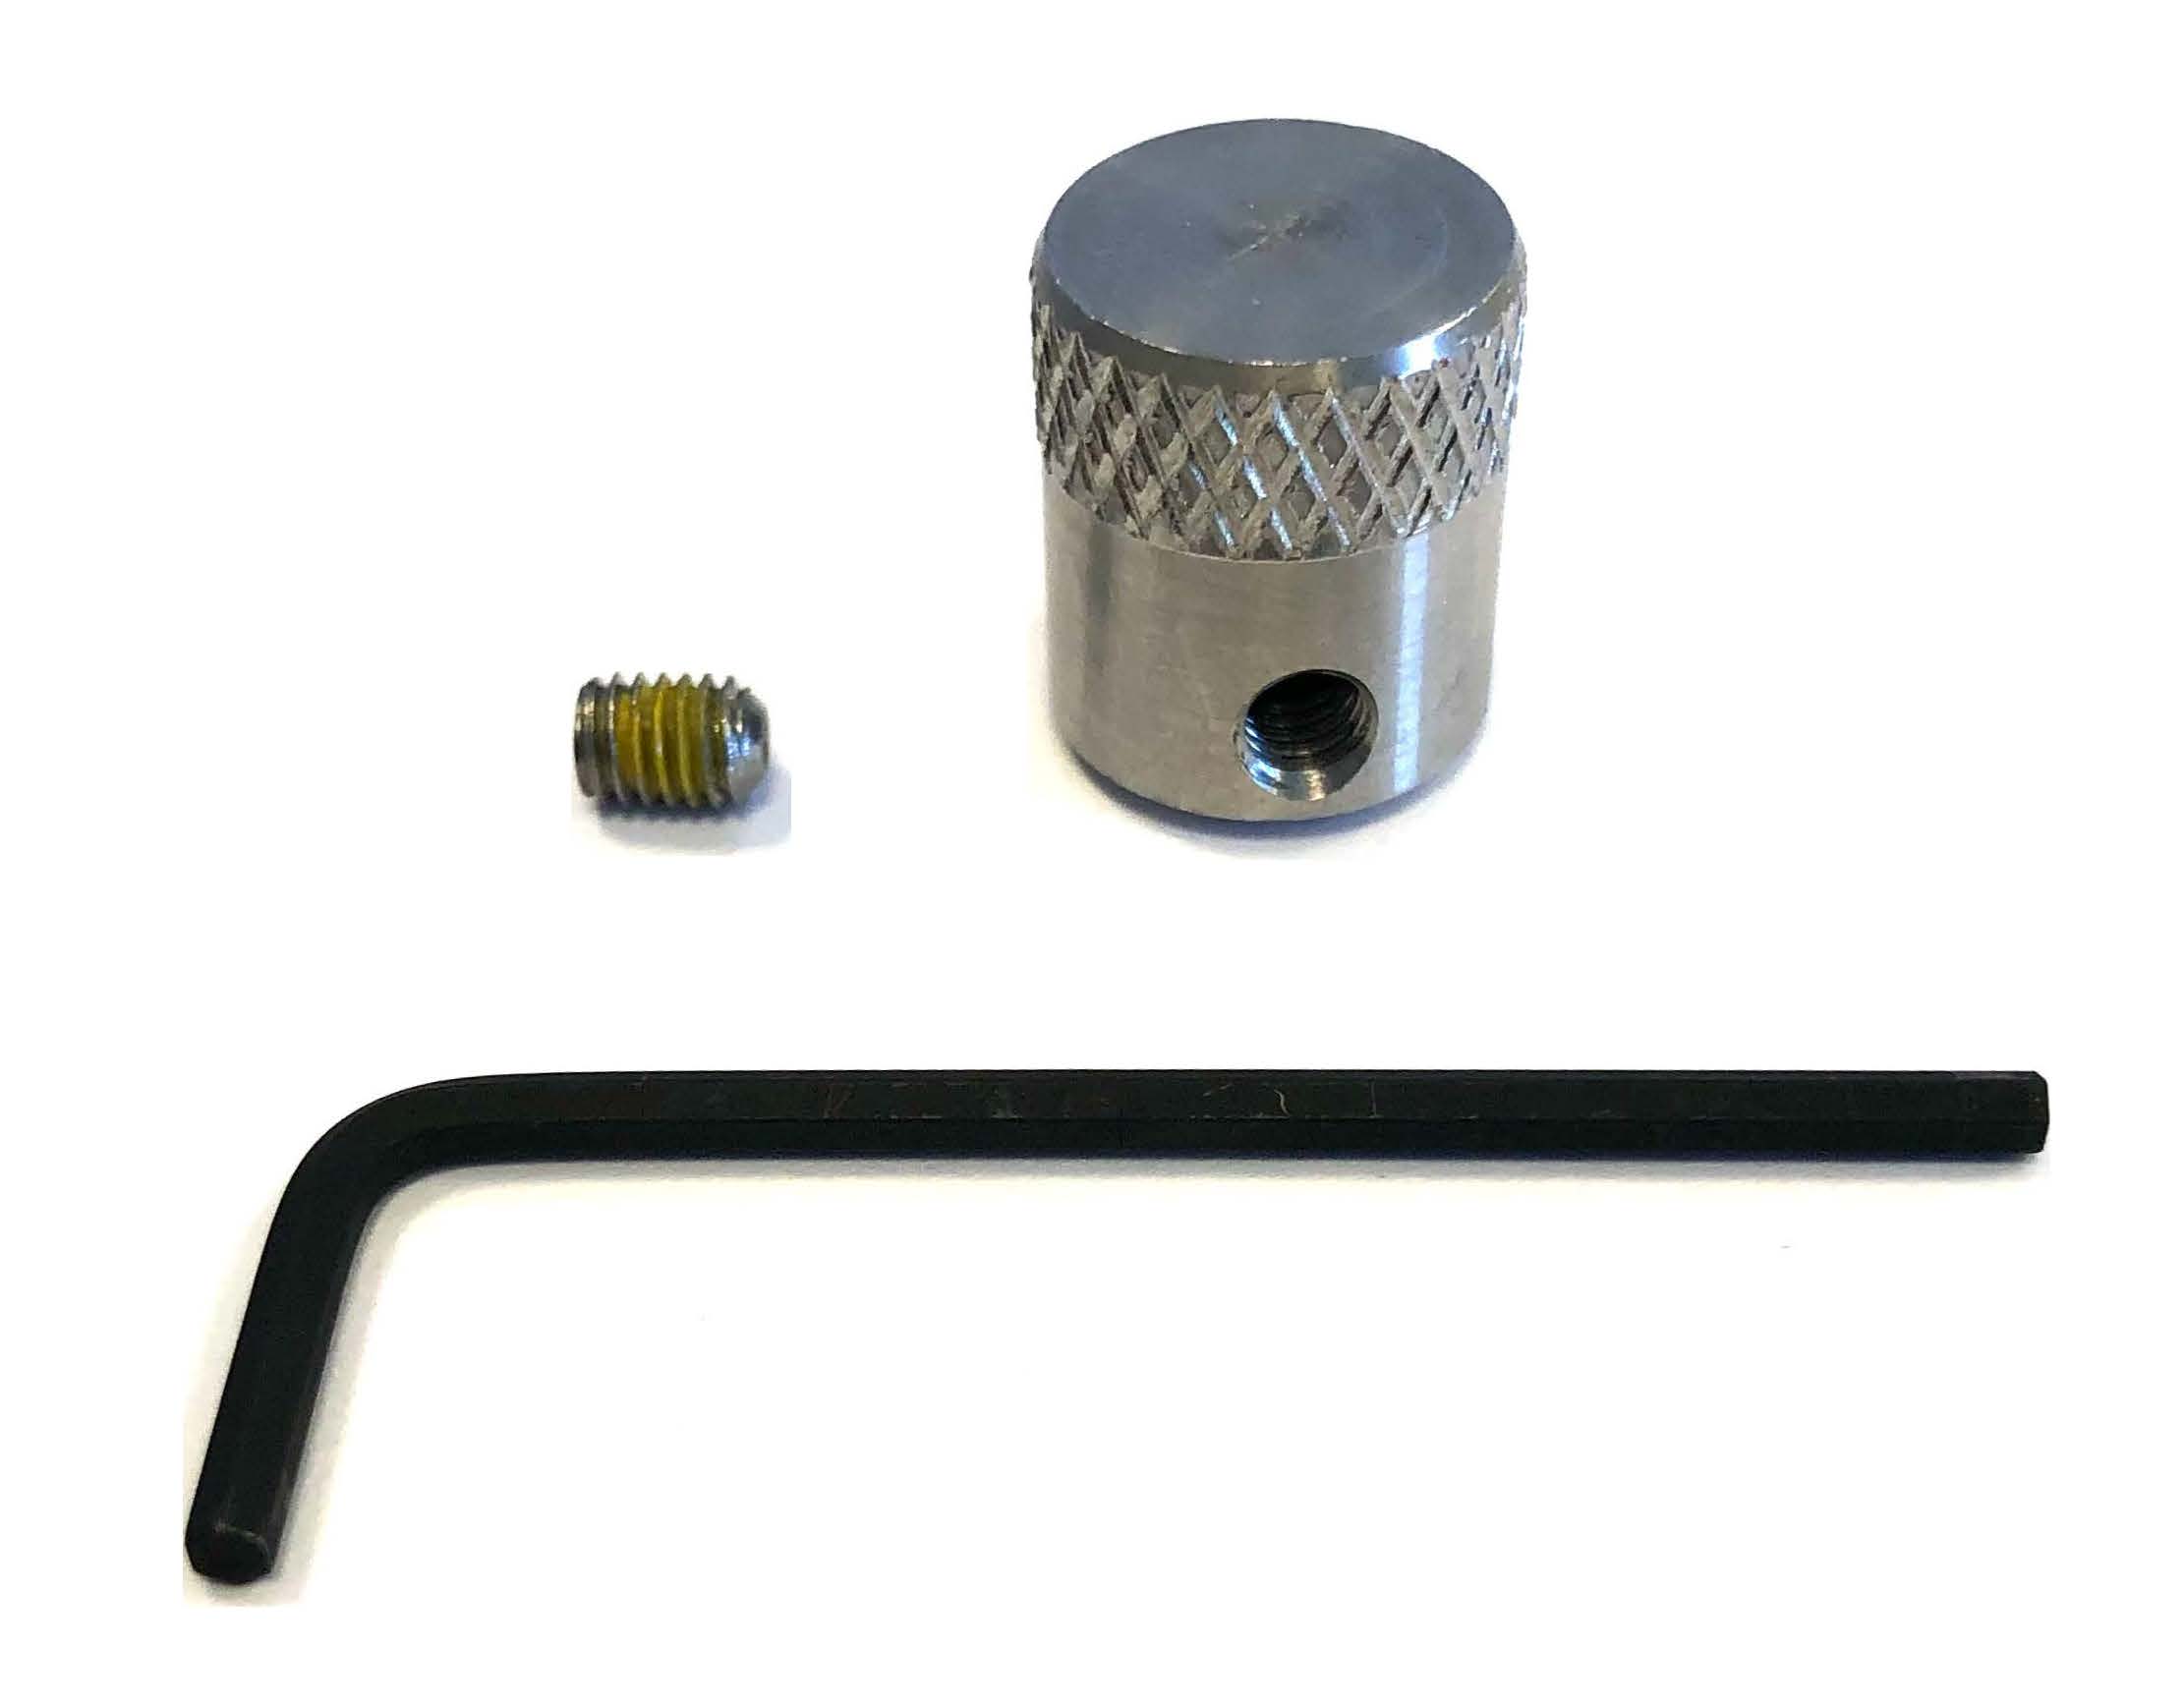 Skylotec Knurled Knob Accessory Set from Columbia Safety